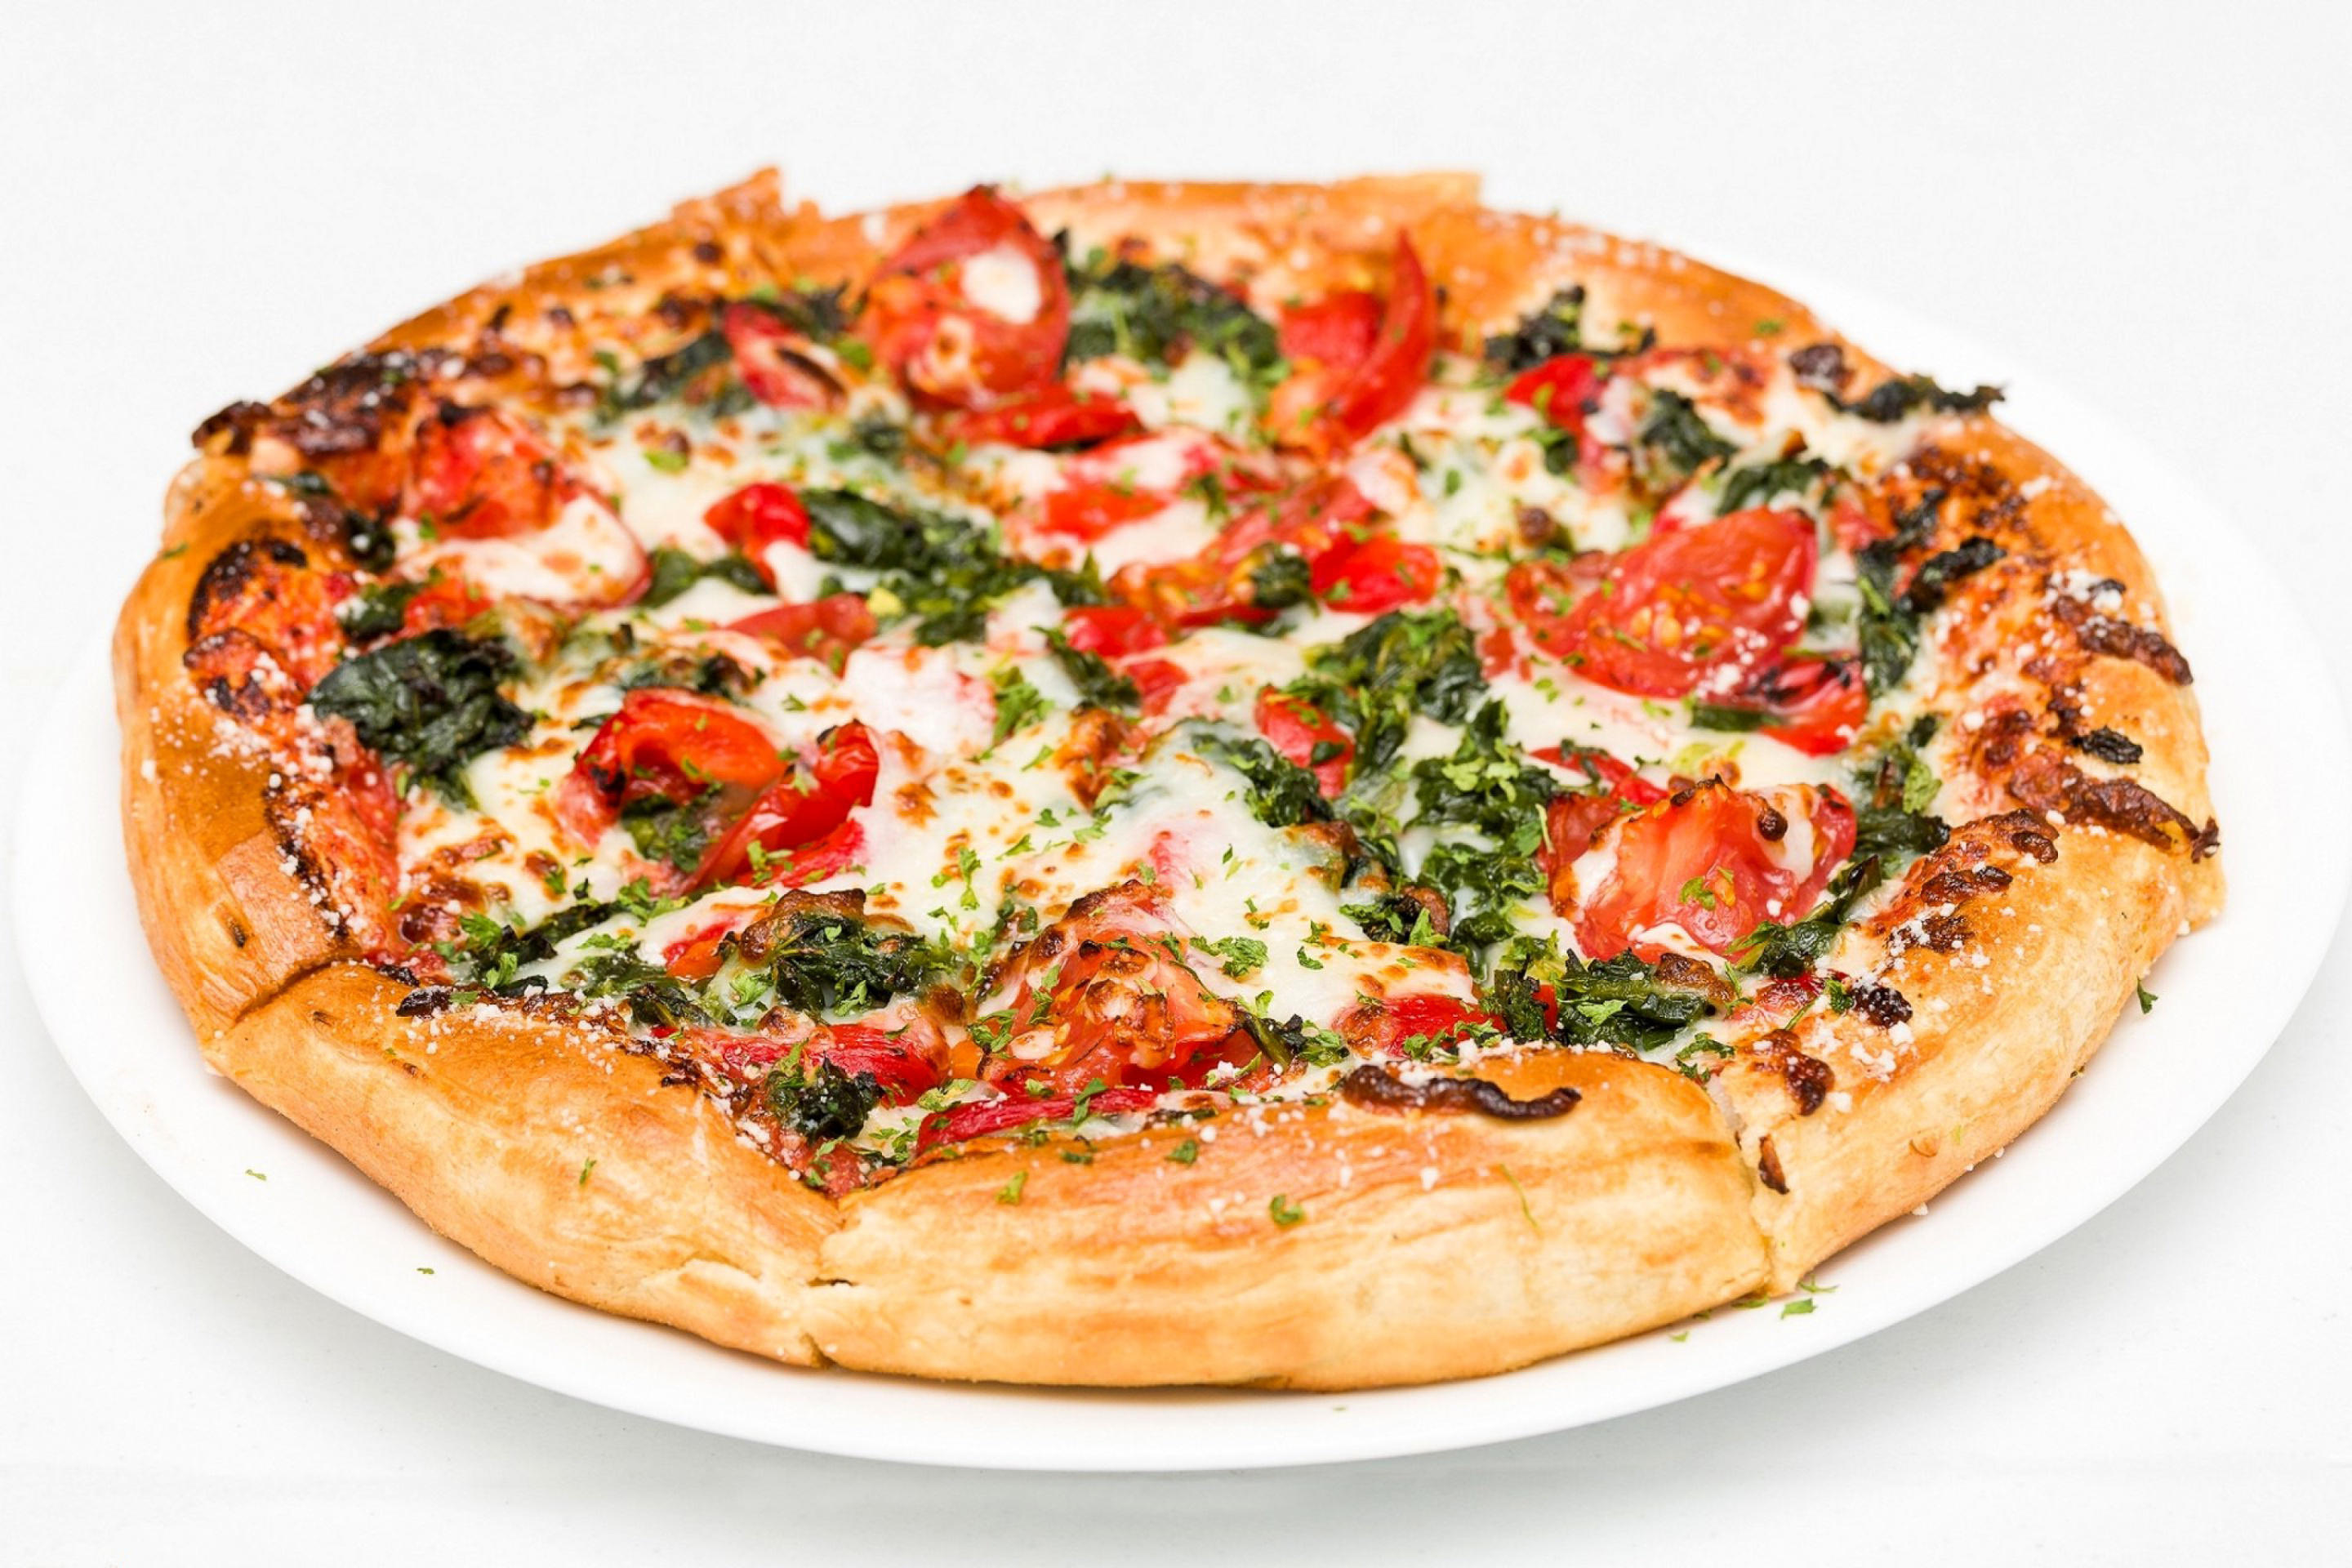 Pizza with spinach screenshot #1 2880x1920